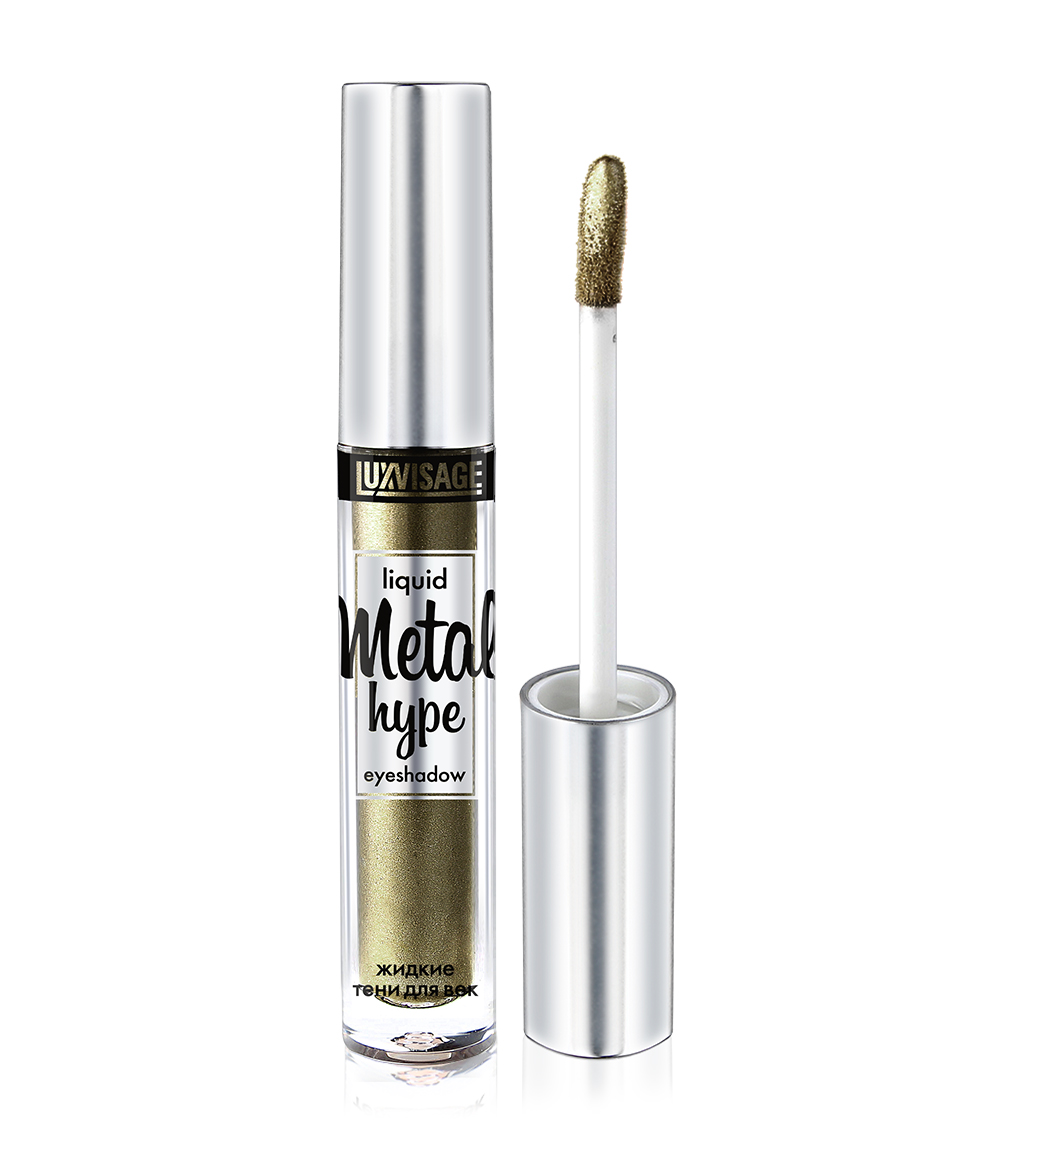 Liquid Eyeshadow Metal Hype- 15 Sunny Olive product available at family pharmacy online buy now at qatar doha